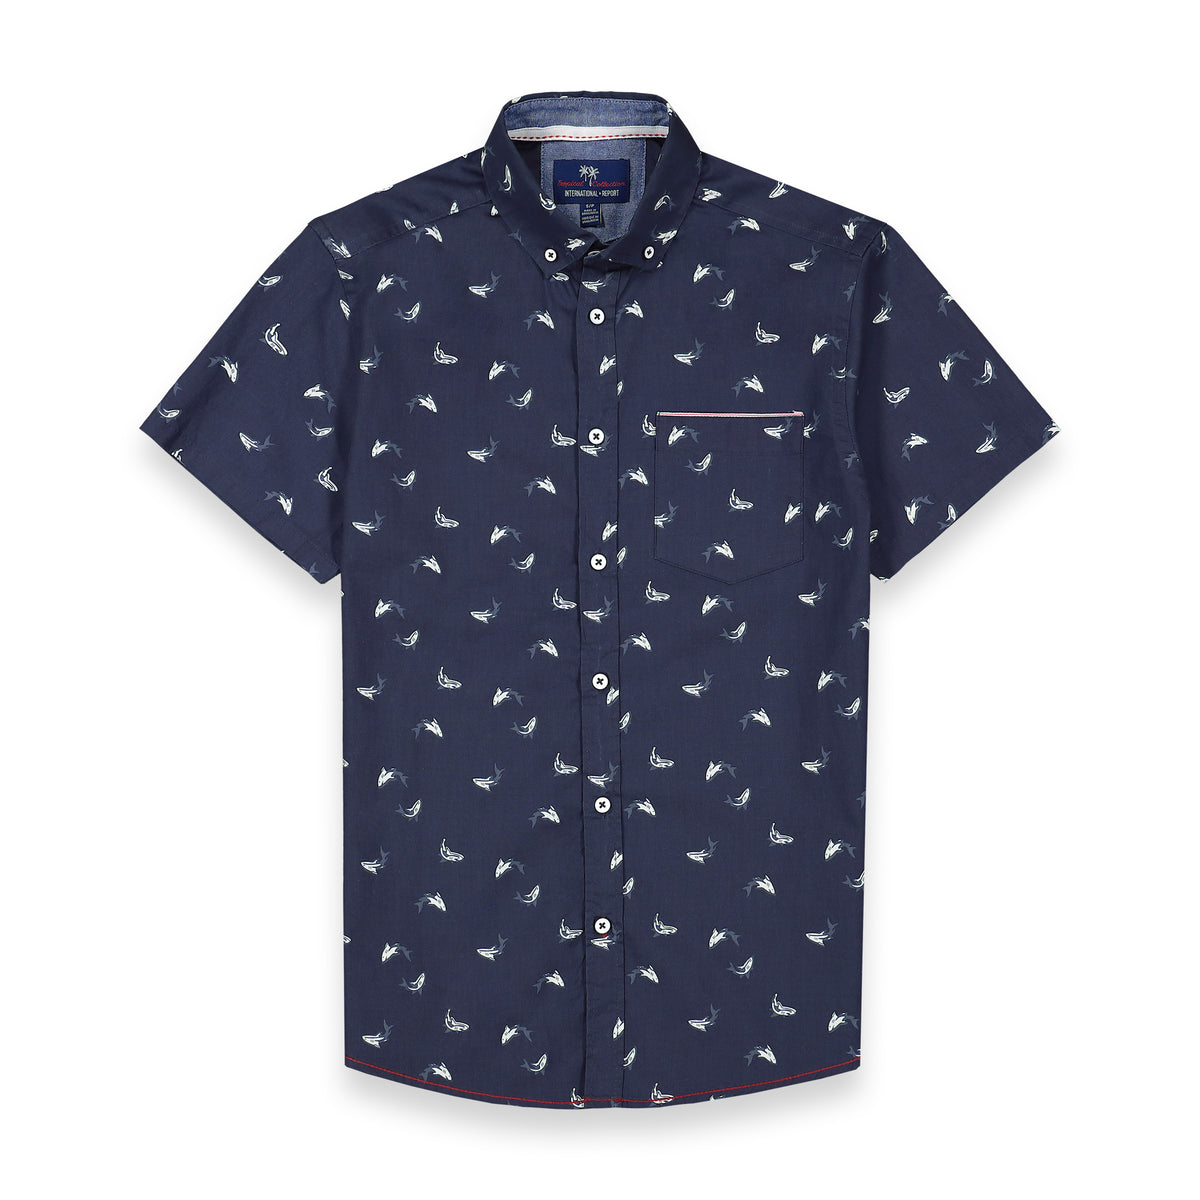 Front View of Short Sleeve Shirt with Shark Print in Navy